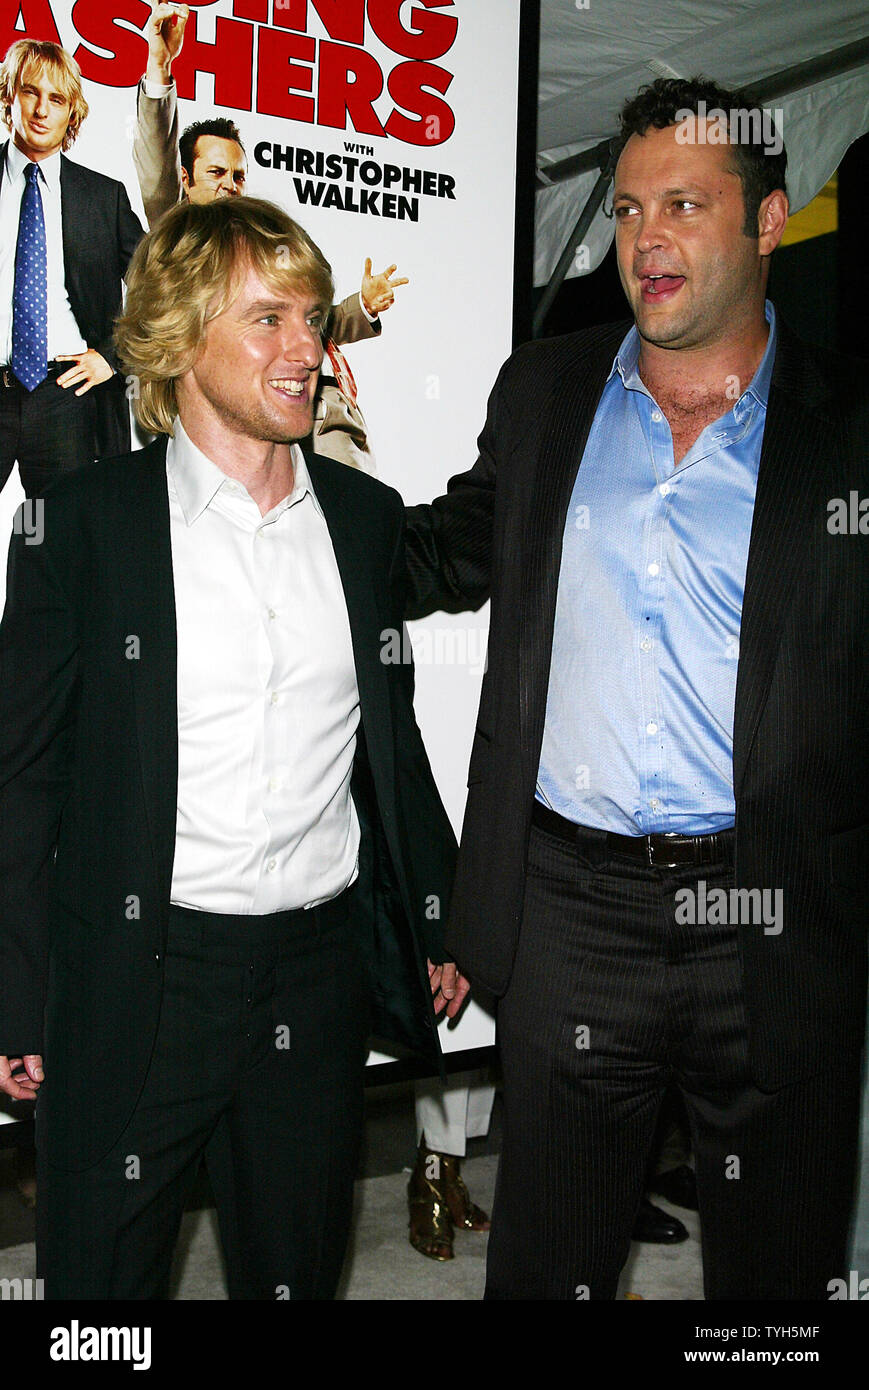 Owen Wilson (left) and Vince Vaughn arrive for the premiere of their new movie 'Wedding Crashers' at the Ziegfeld Theater in New York on July13, 2005.   (UPI Photo/Laura Cavanaugh) Stock Photo